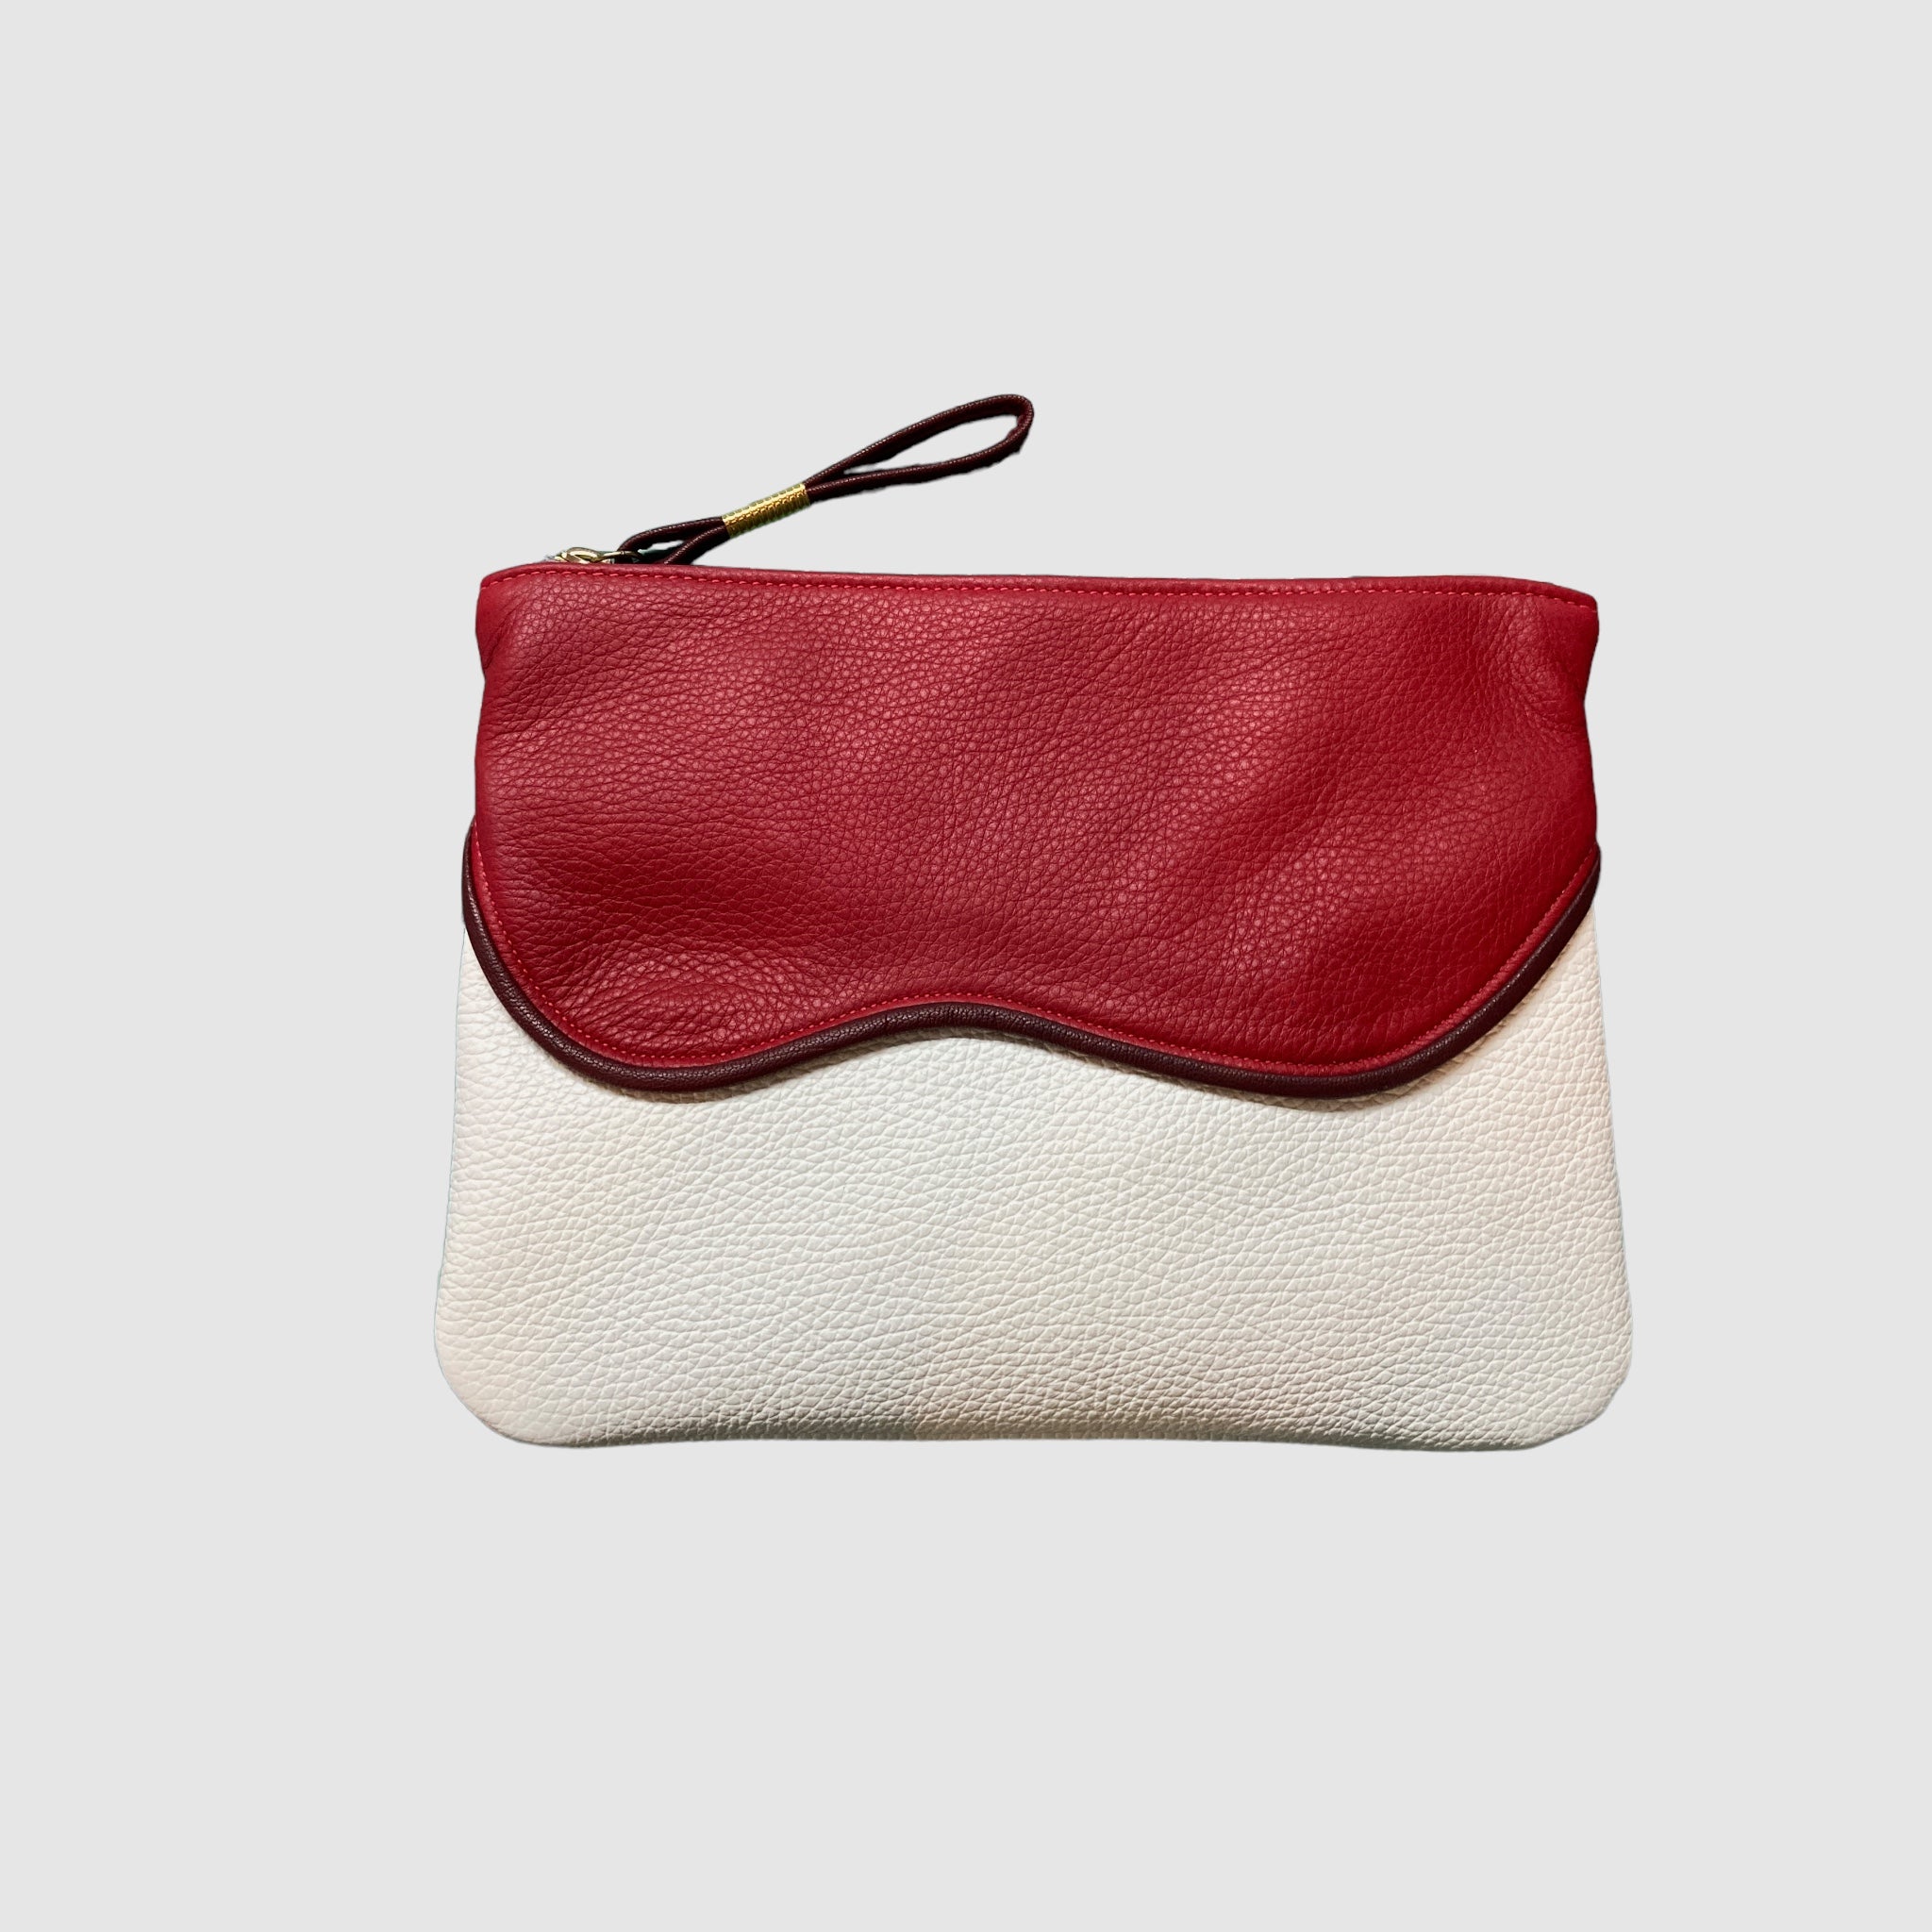 FALL WITH ME CLUTCH // RED, WHITE & WINE